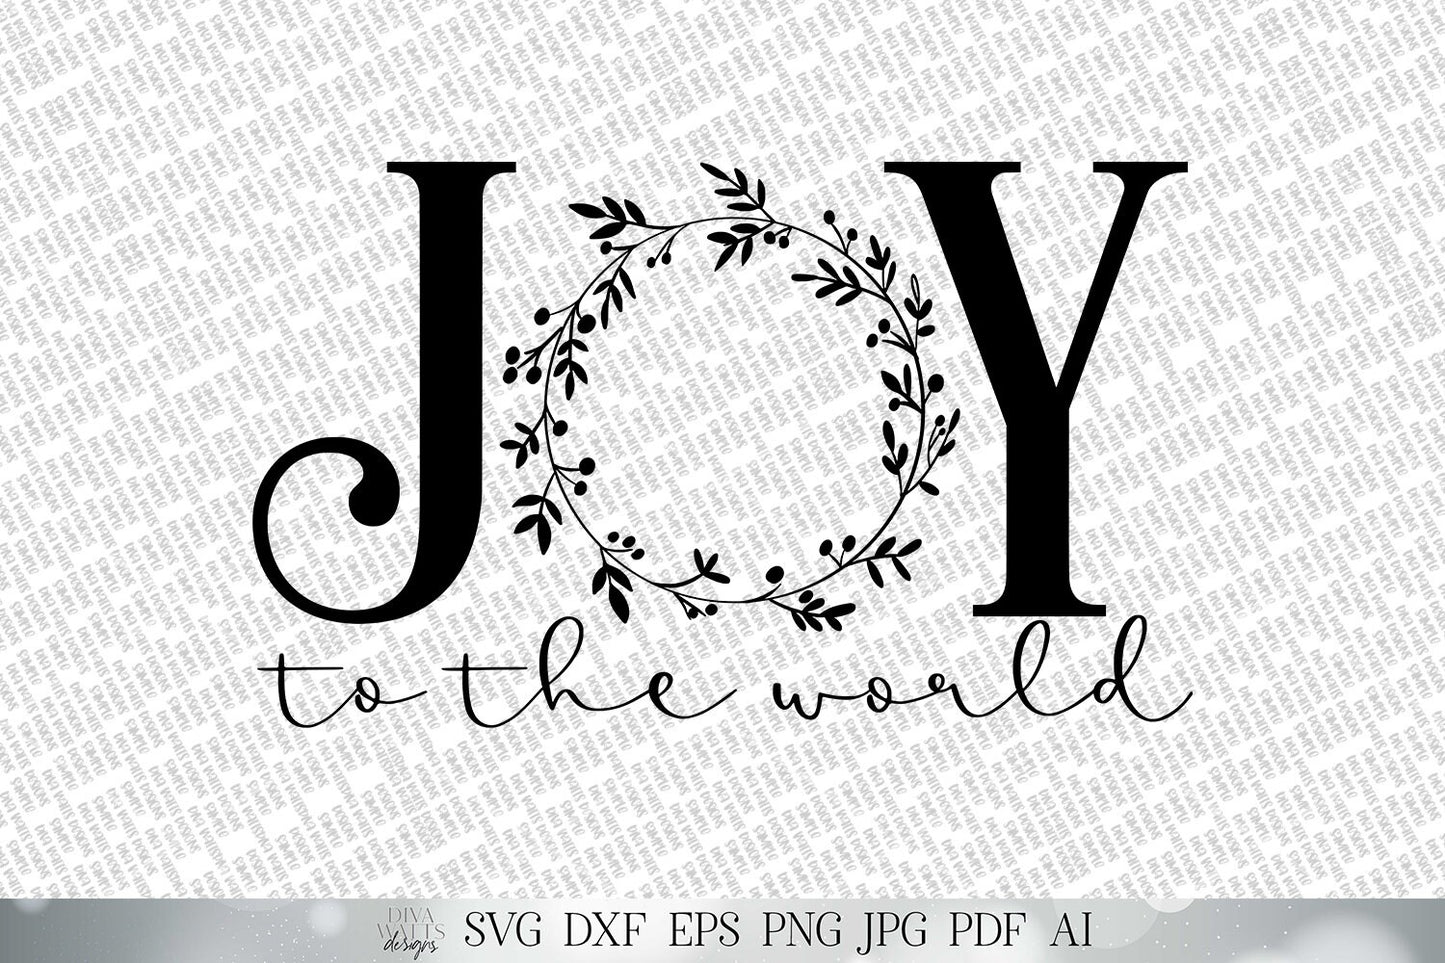 Joy To The World SVG | Christmas SVG | Christian Hymn SVG | dxf and more! | Farmhouse Sign | Printable and more